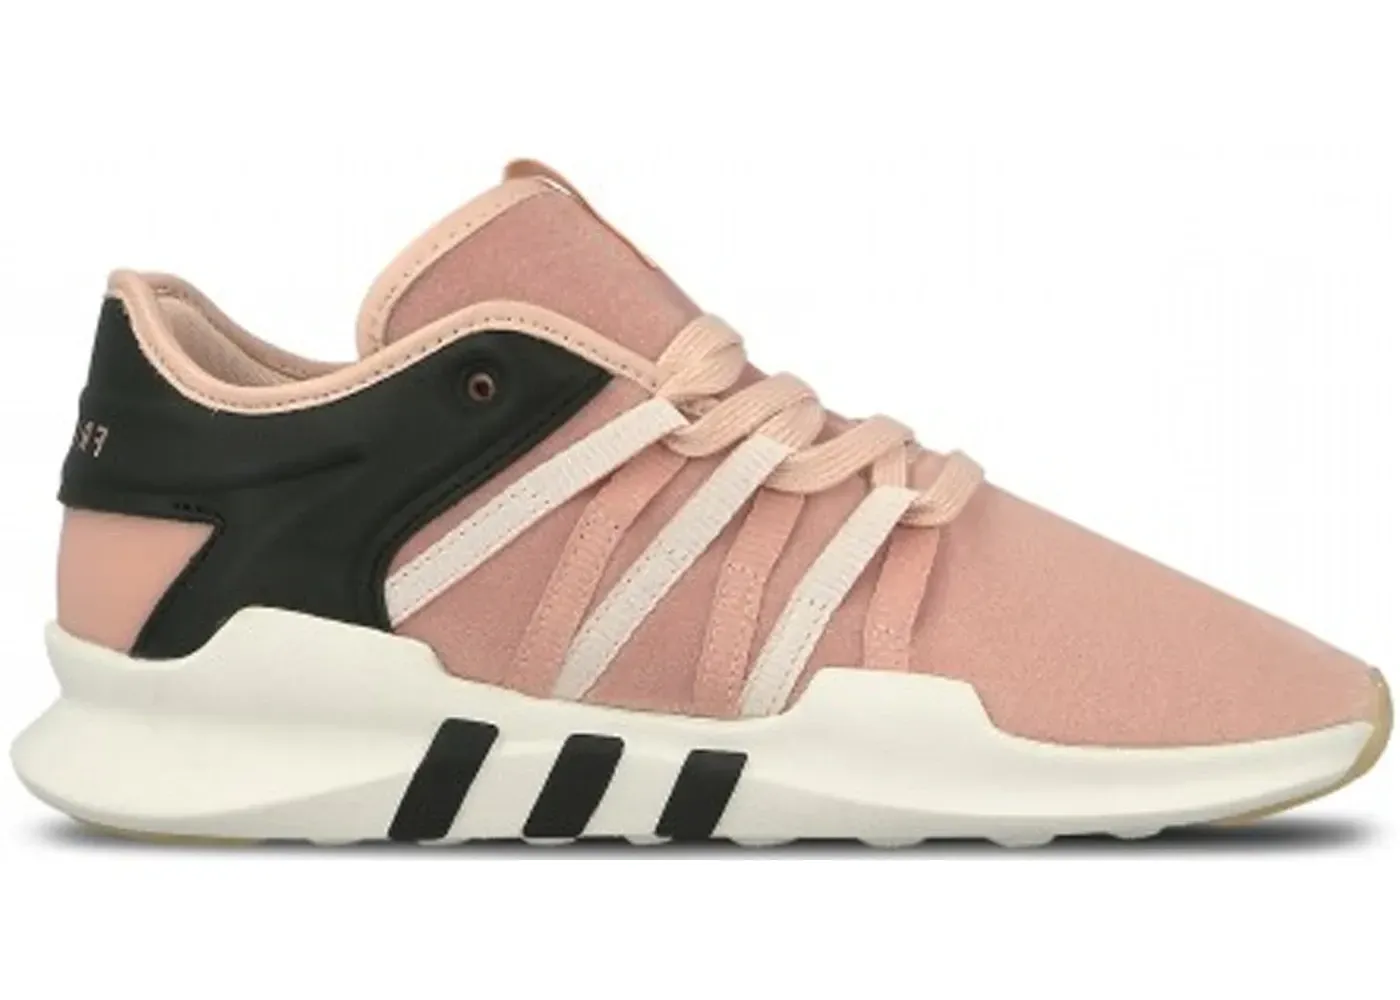 adidas EQT Lacing ADV Overkill x Fruition Vapour Pink 